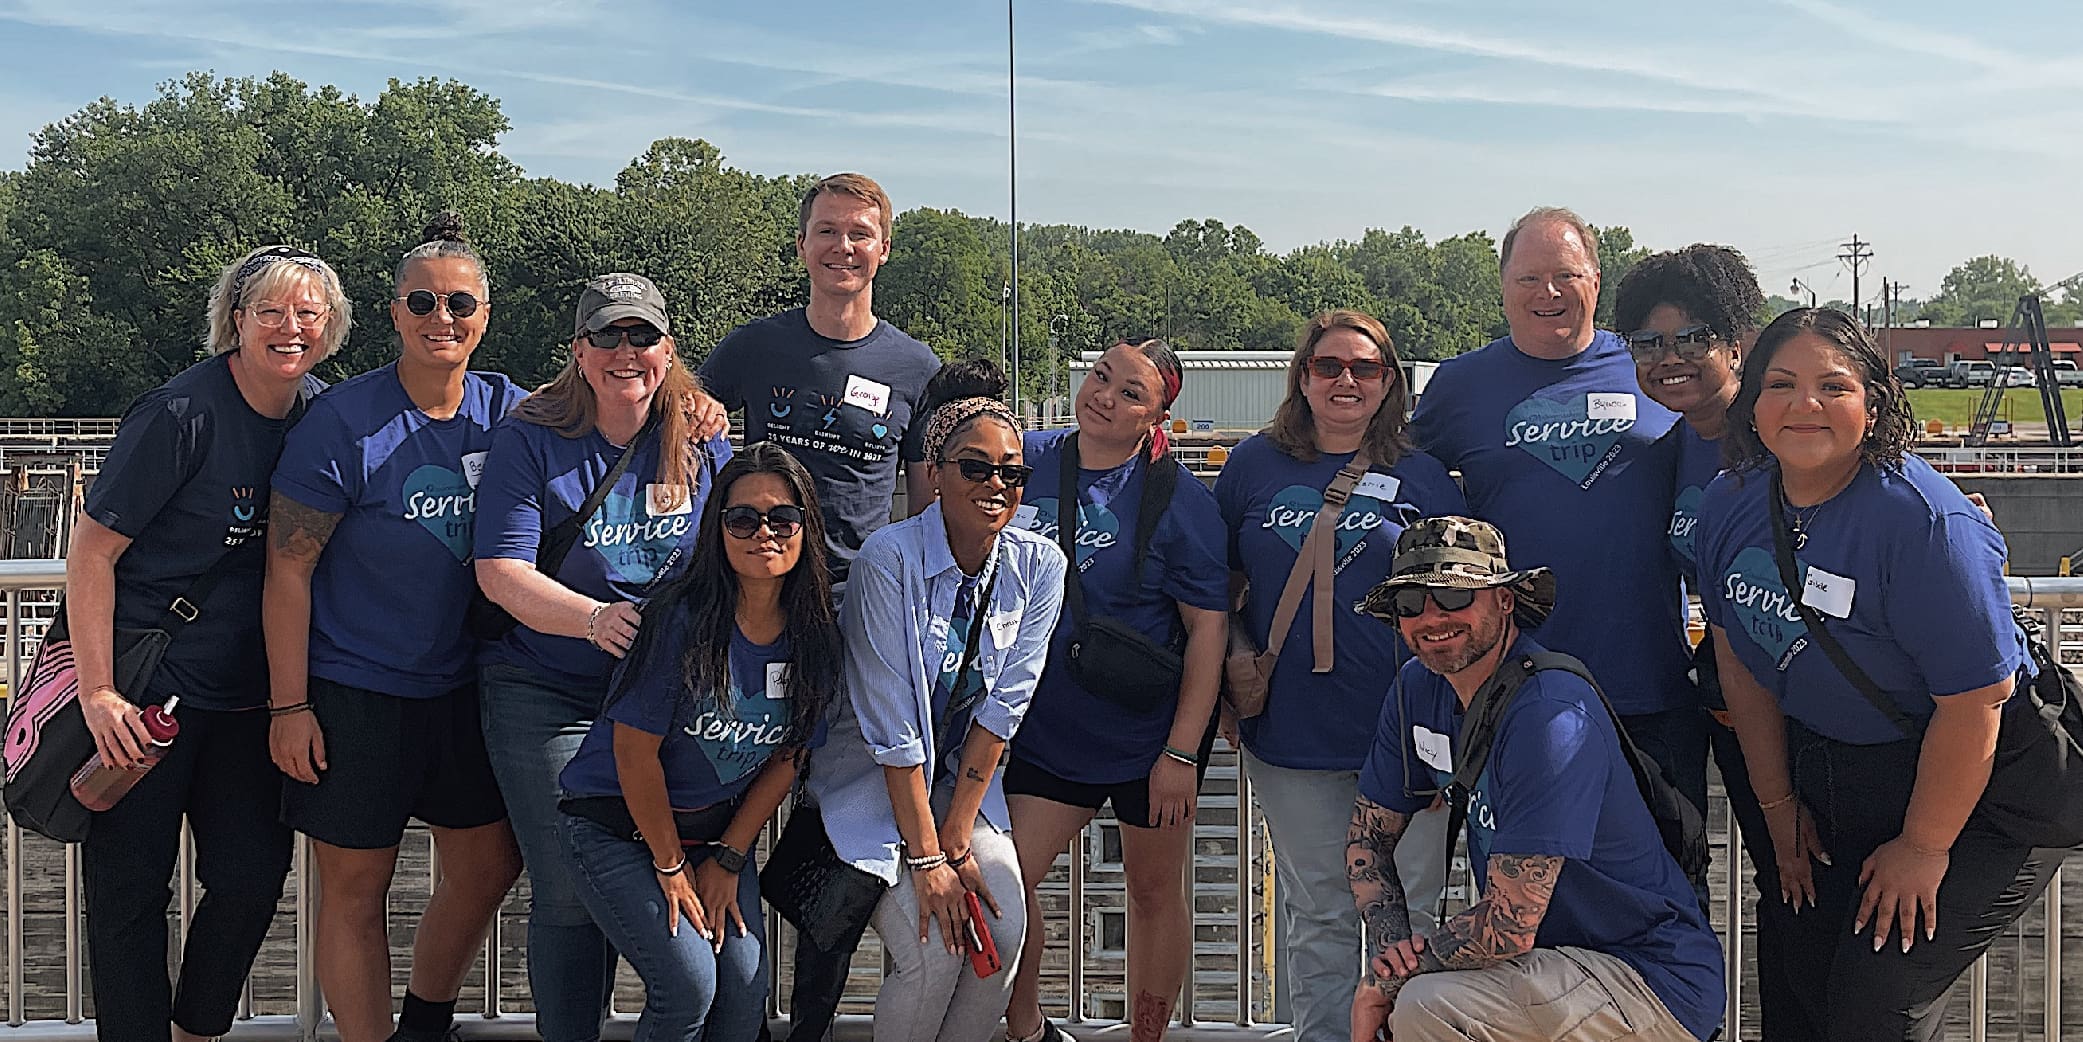 A Group of Businessolver Employees on a Service Trip for the Businessolver Foundation